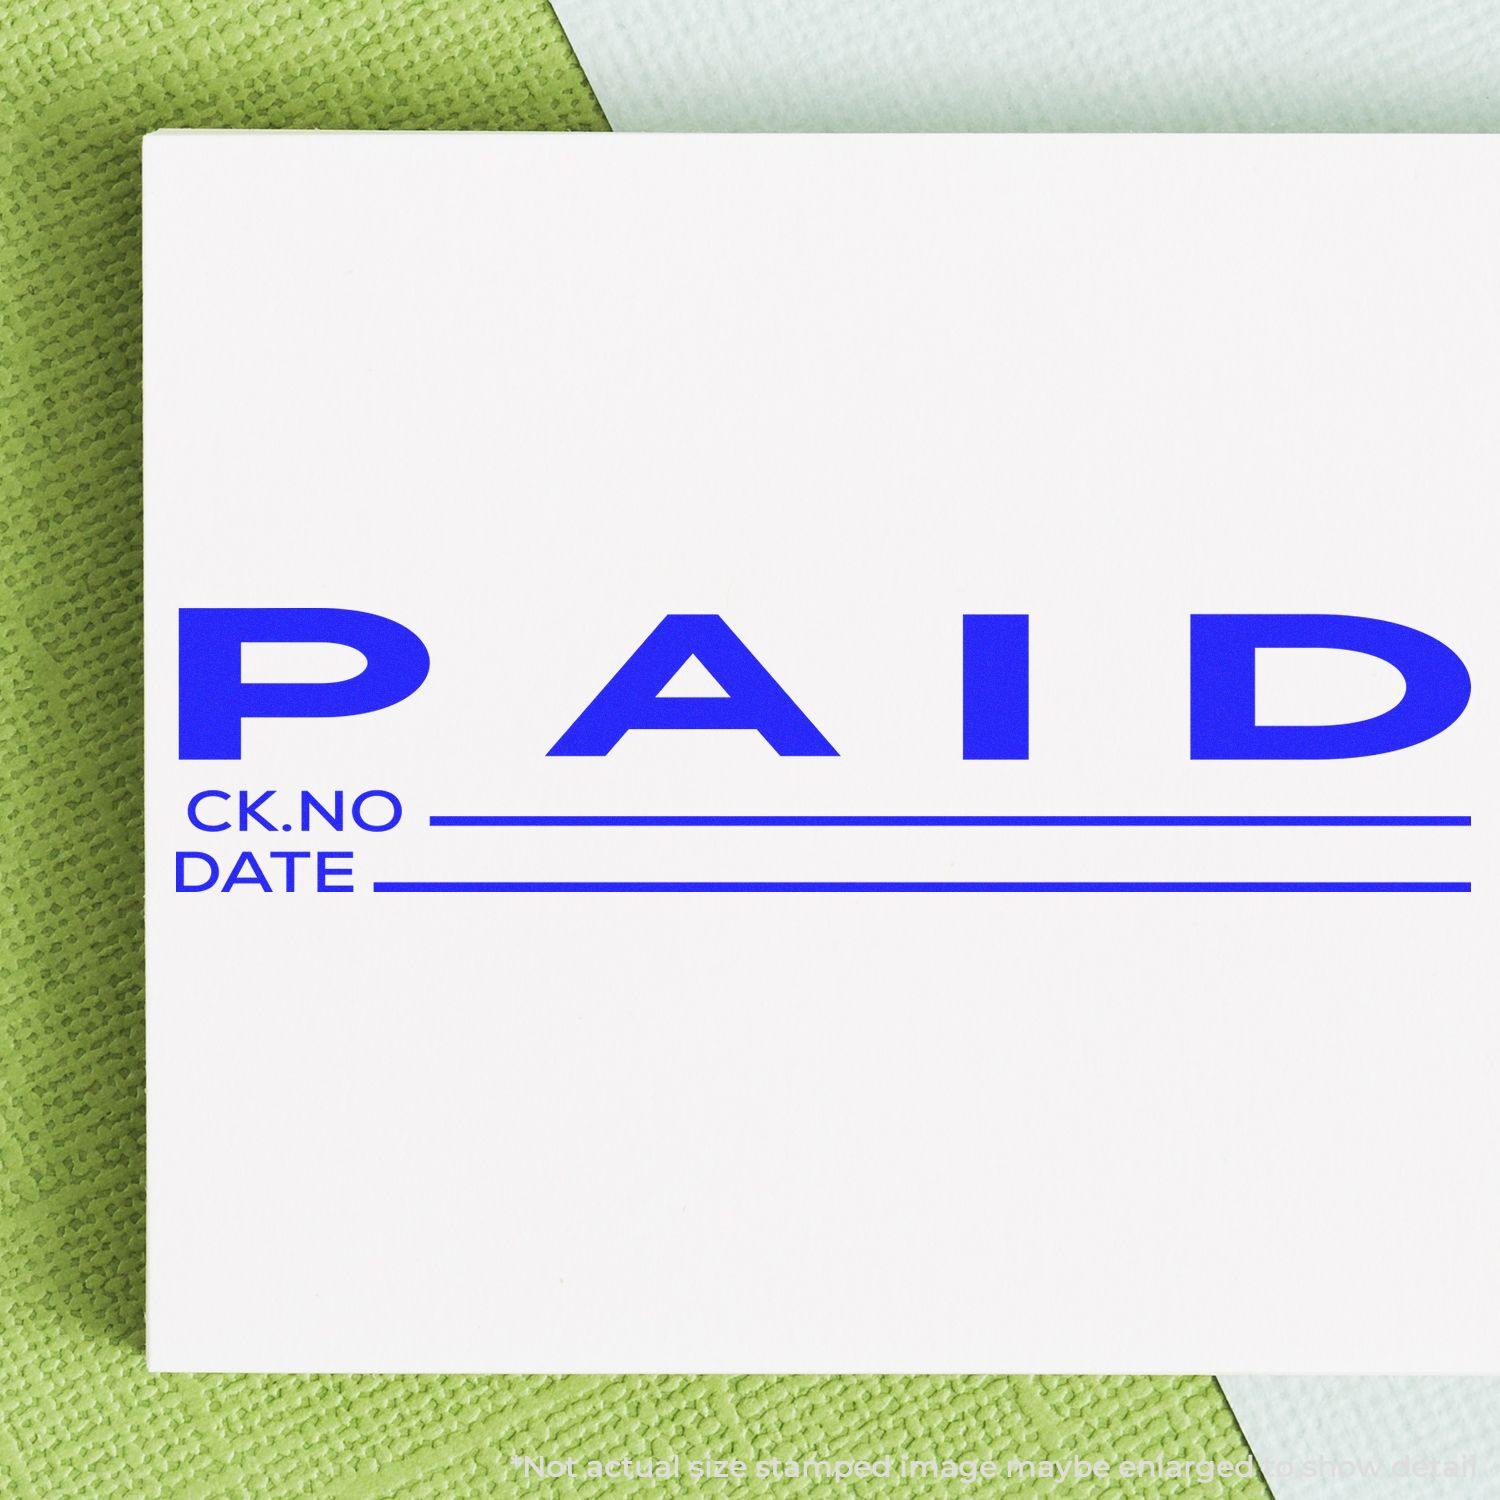 A stock office rubber stamp with a stamped image showing how the text "PAID" in a large font with space where you can write down both the check number and the date is displayed after stamping.